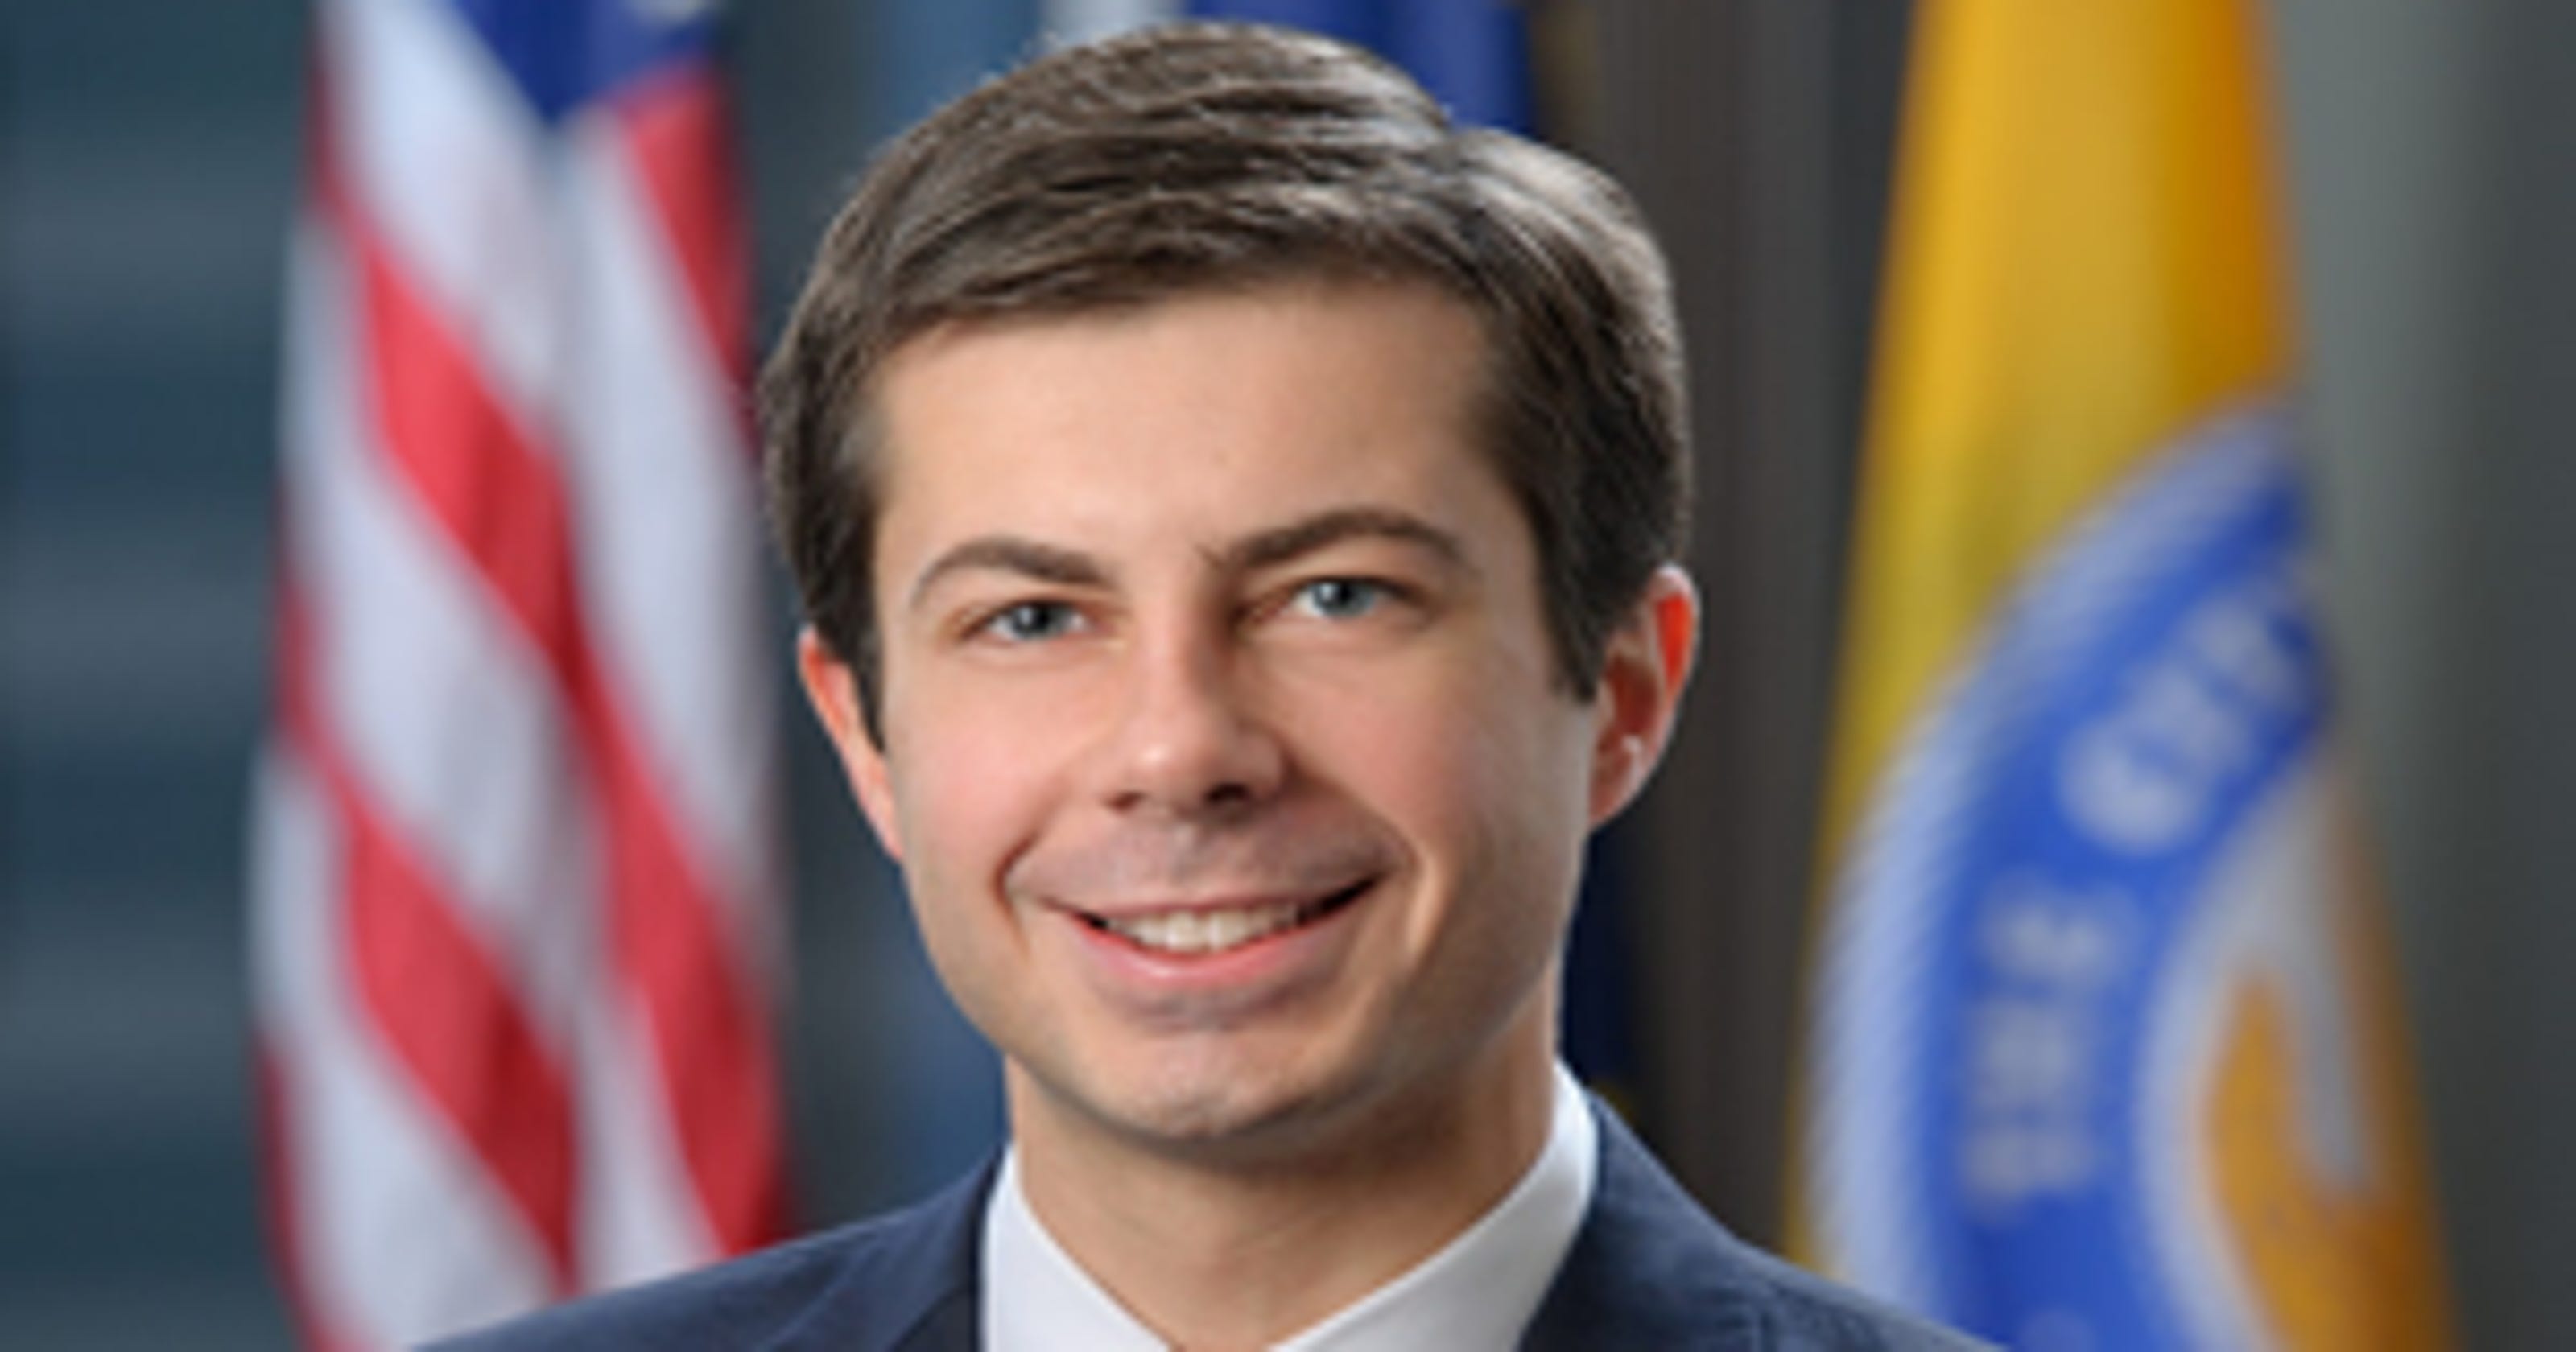 Pete Buttigieg running for president 2020: What we know3200 x 1680